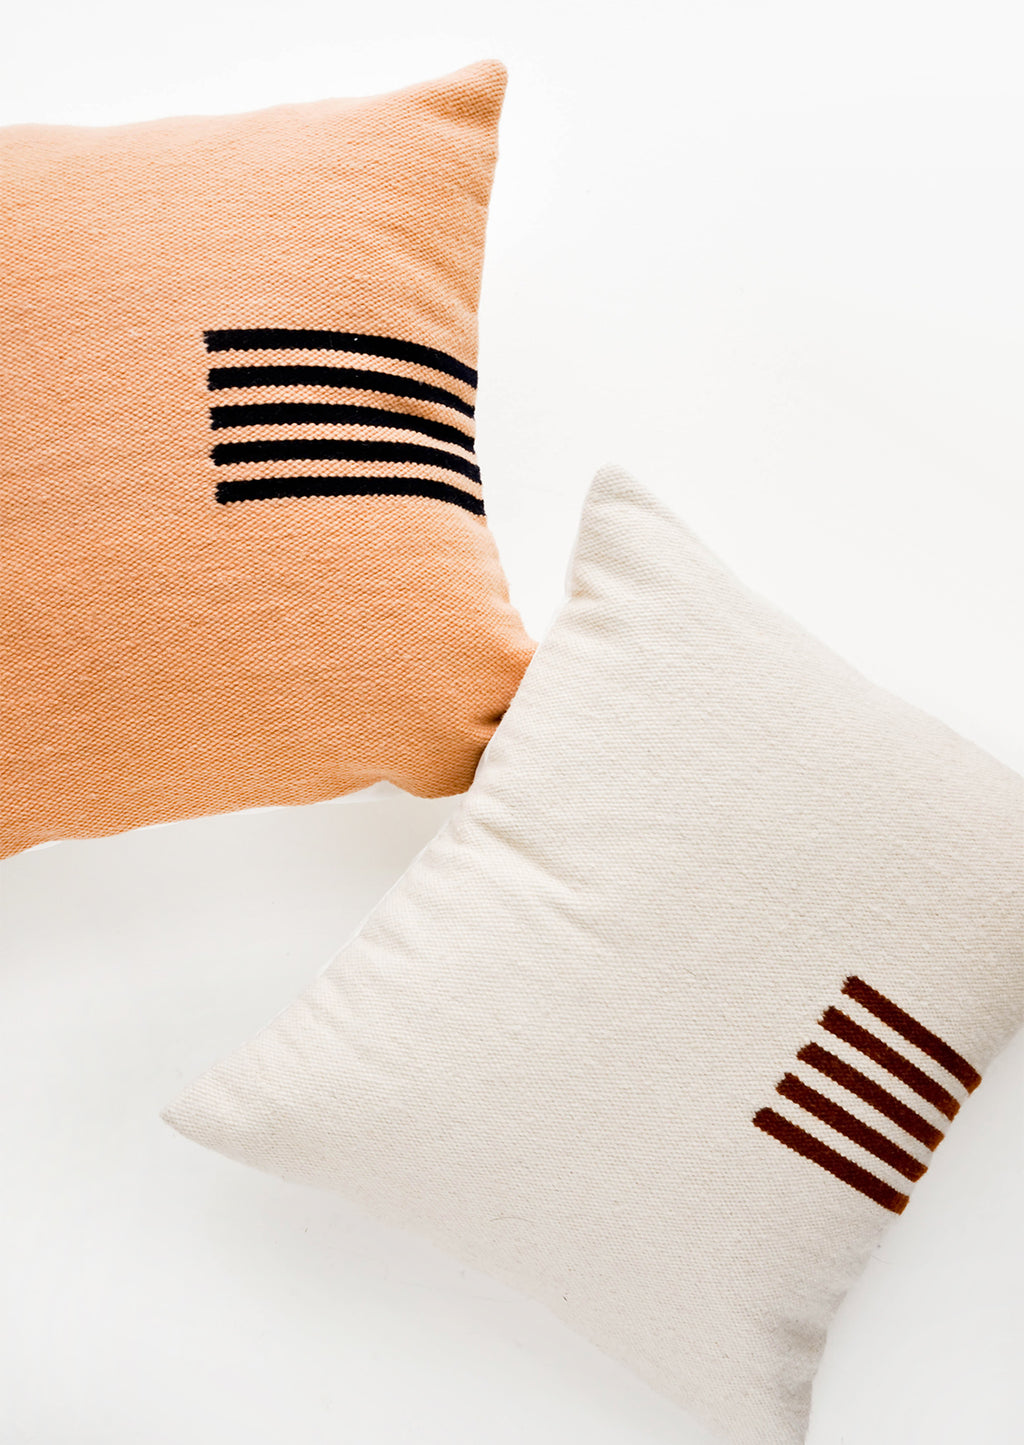 1: Square wool throw pillows with contrasting small stripe detail at side.